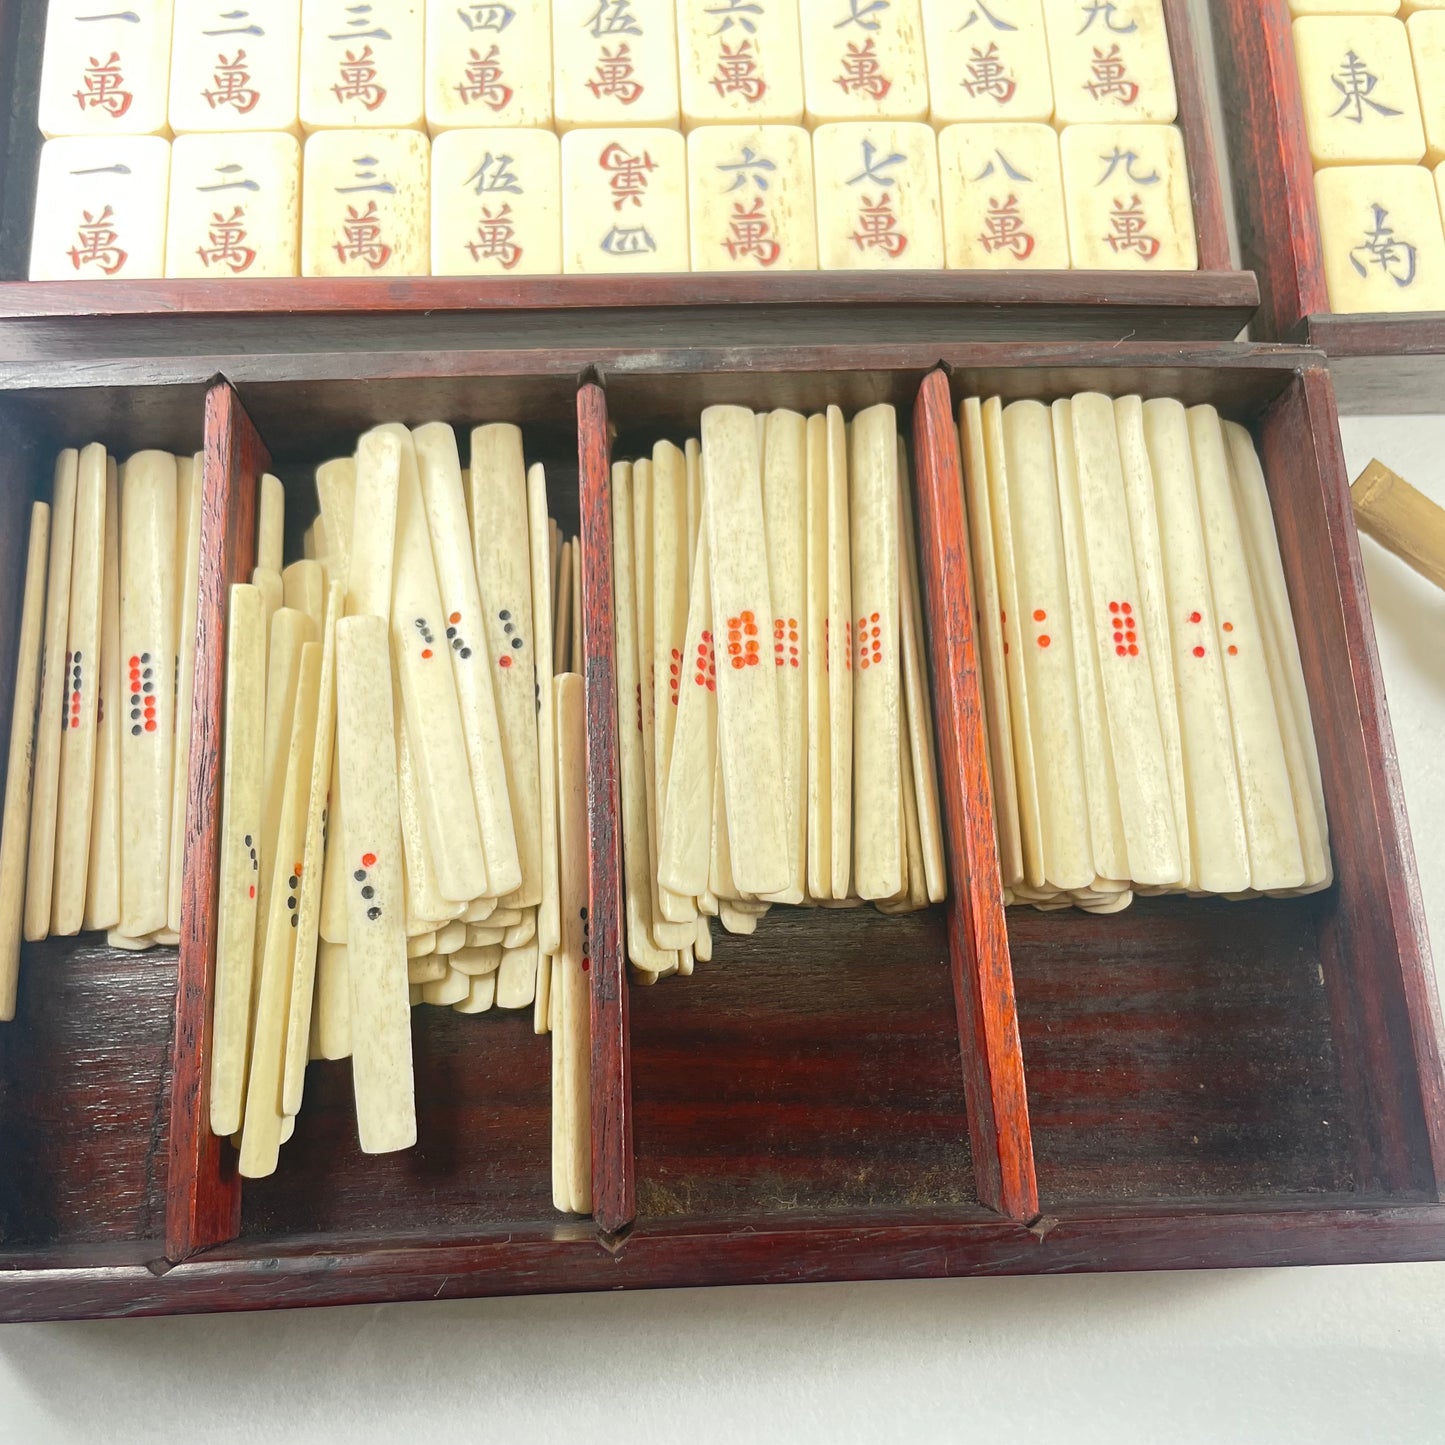 Antique Rare Complete c.1900 Chinese Mahjong Set (no English no Arabic Numerals) Small 3/4” x 1” Tiles Special Tiles are Flowers Box Includes Betting Sticks Dice w/ Box as well as Direction Disk